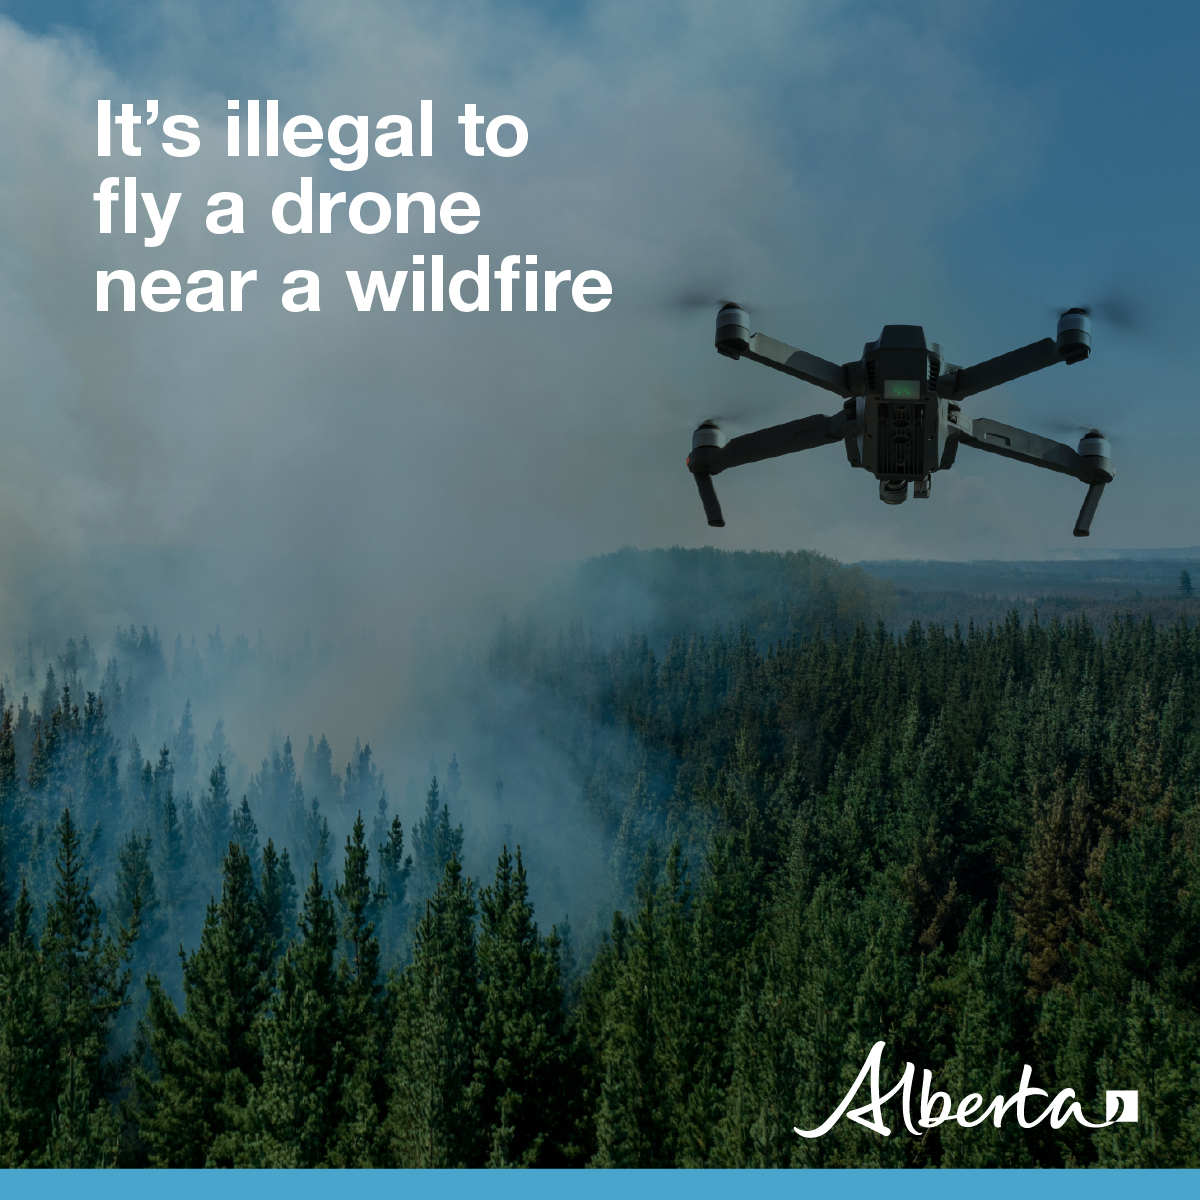 When you fly a drone over or near an Alberta wildfire, you’re breaking the law, endangering firefighting personnel and potentially causing firefighting operations to stop. . bit.ly/3UC0ZHV